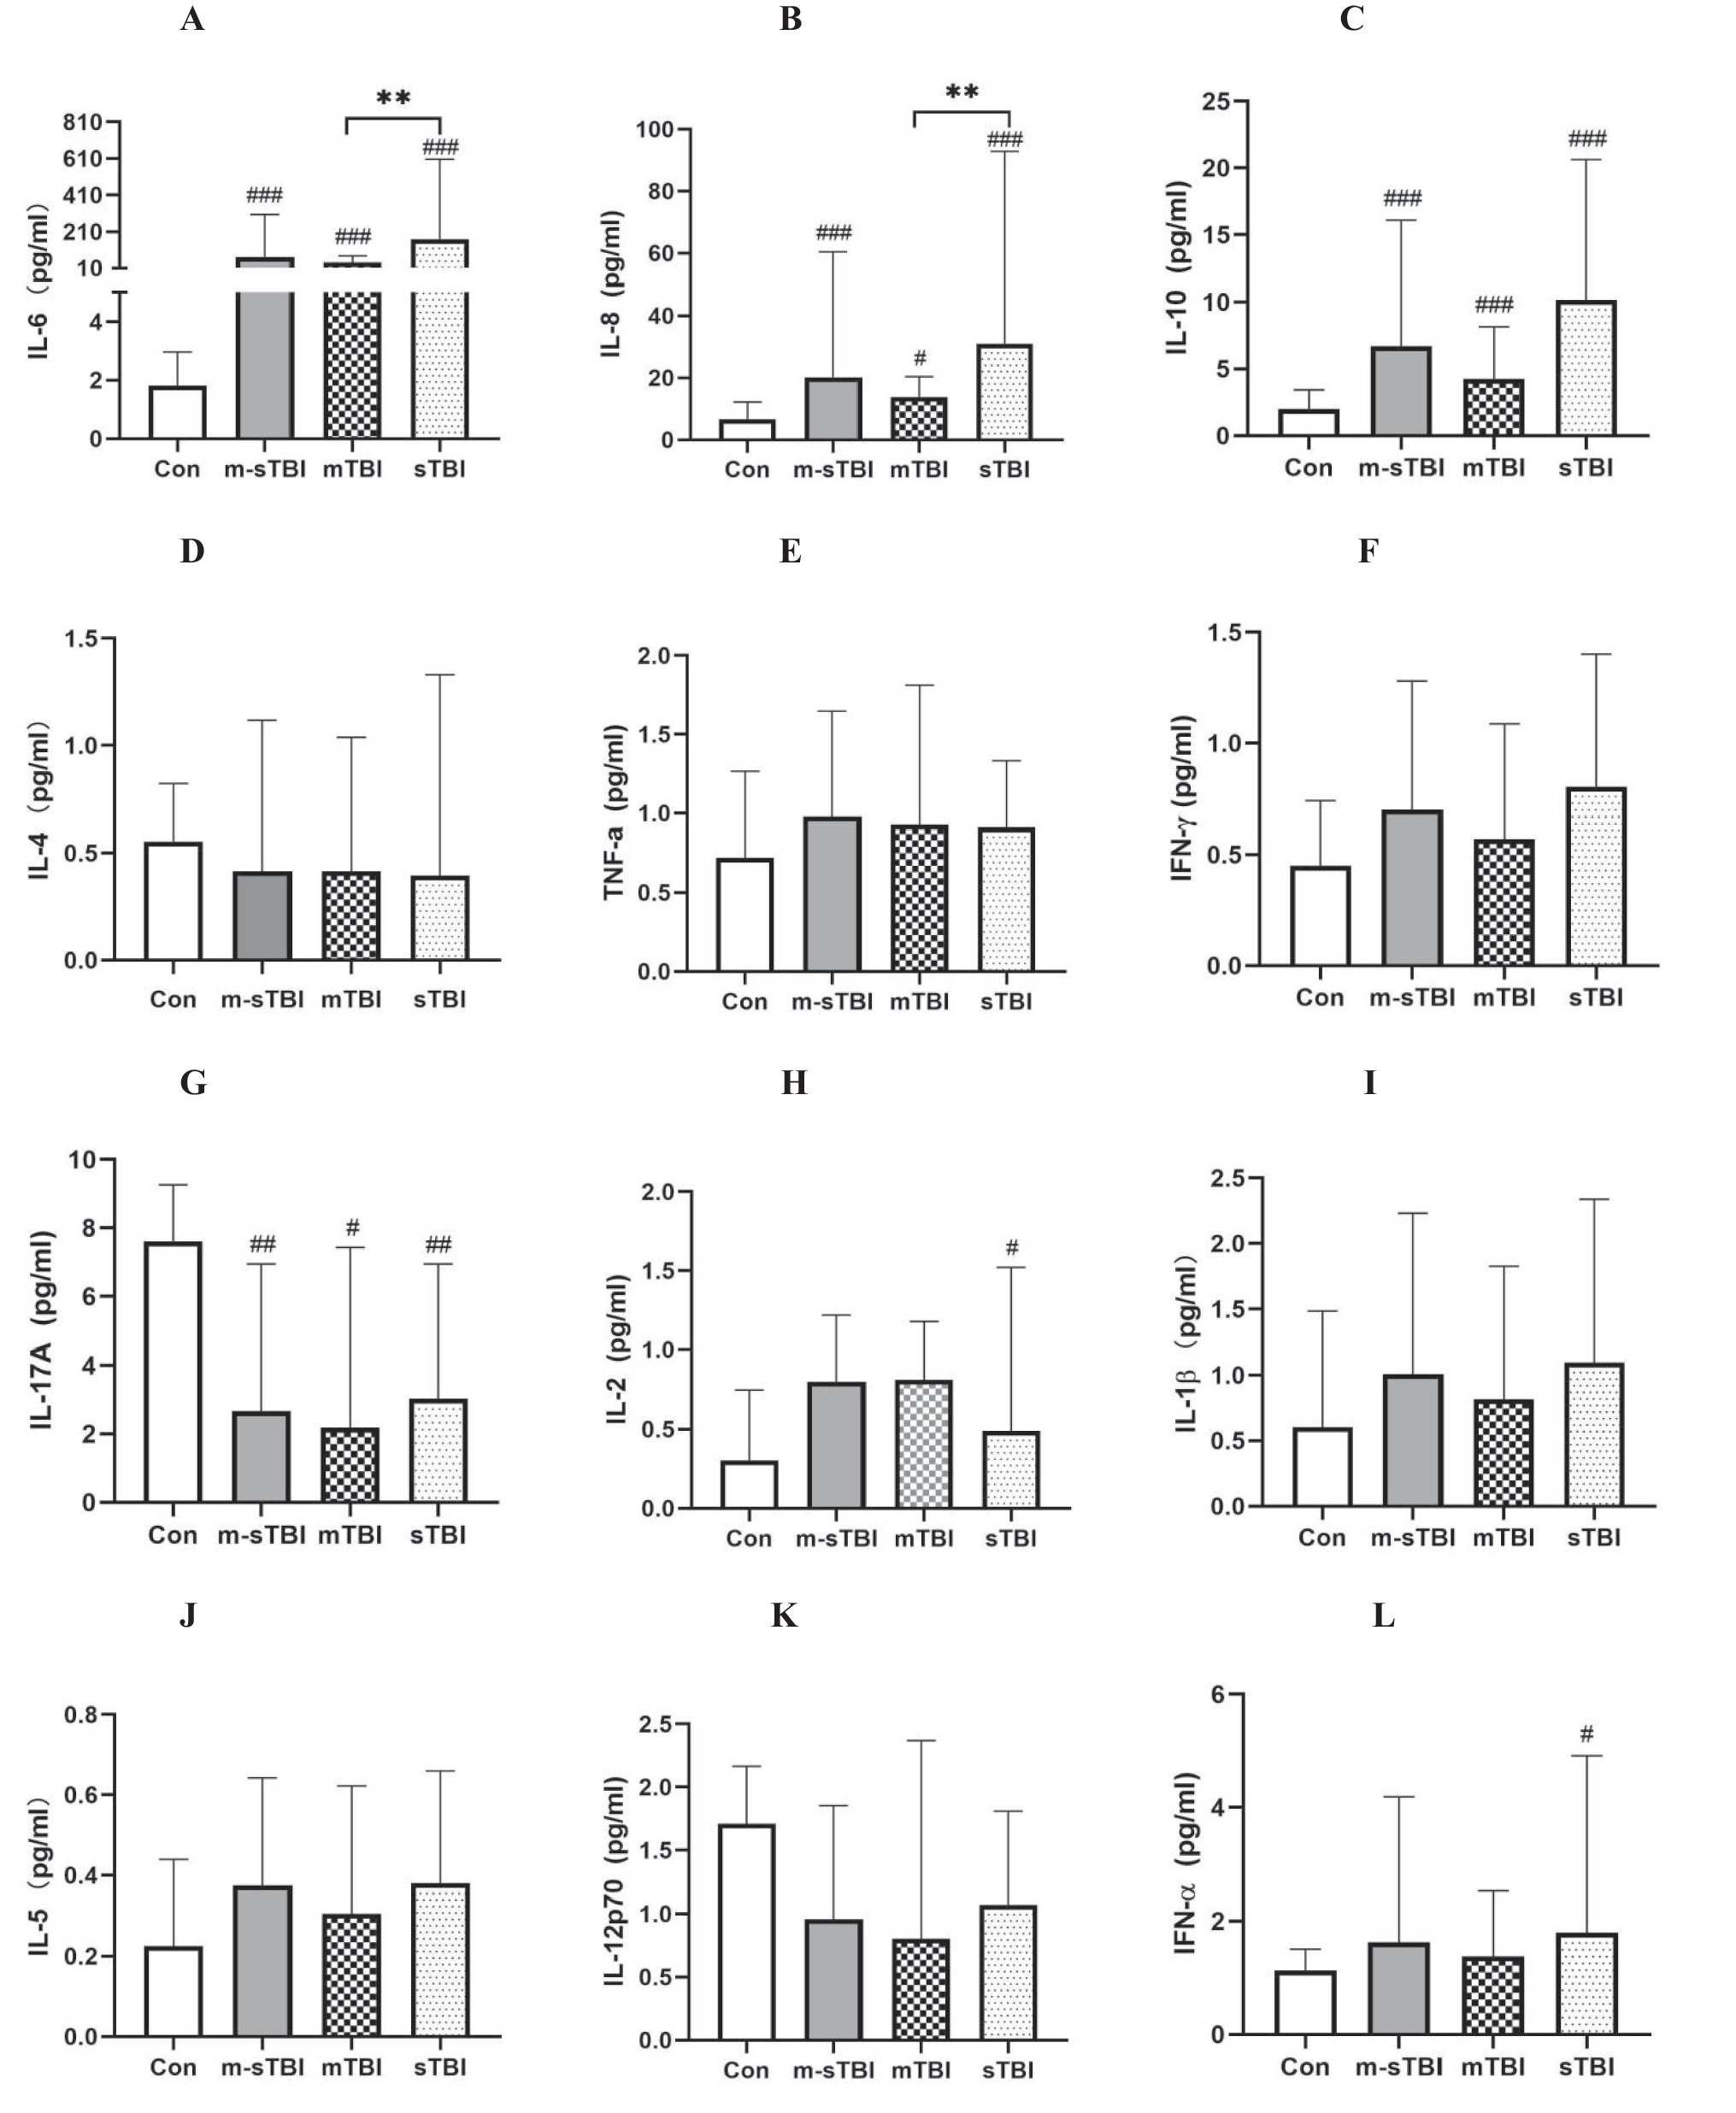 Plasma profiles of inflammatory cytokines in children with moderate to severe traumatic brain injury: a prospective cohort study